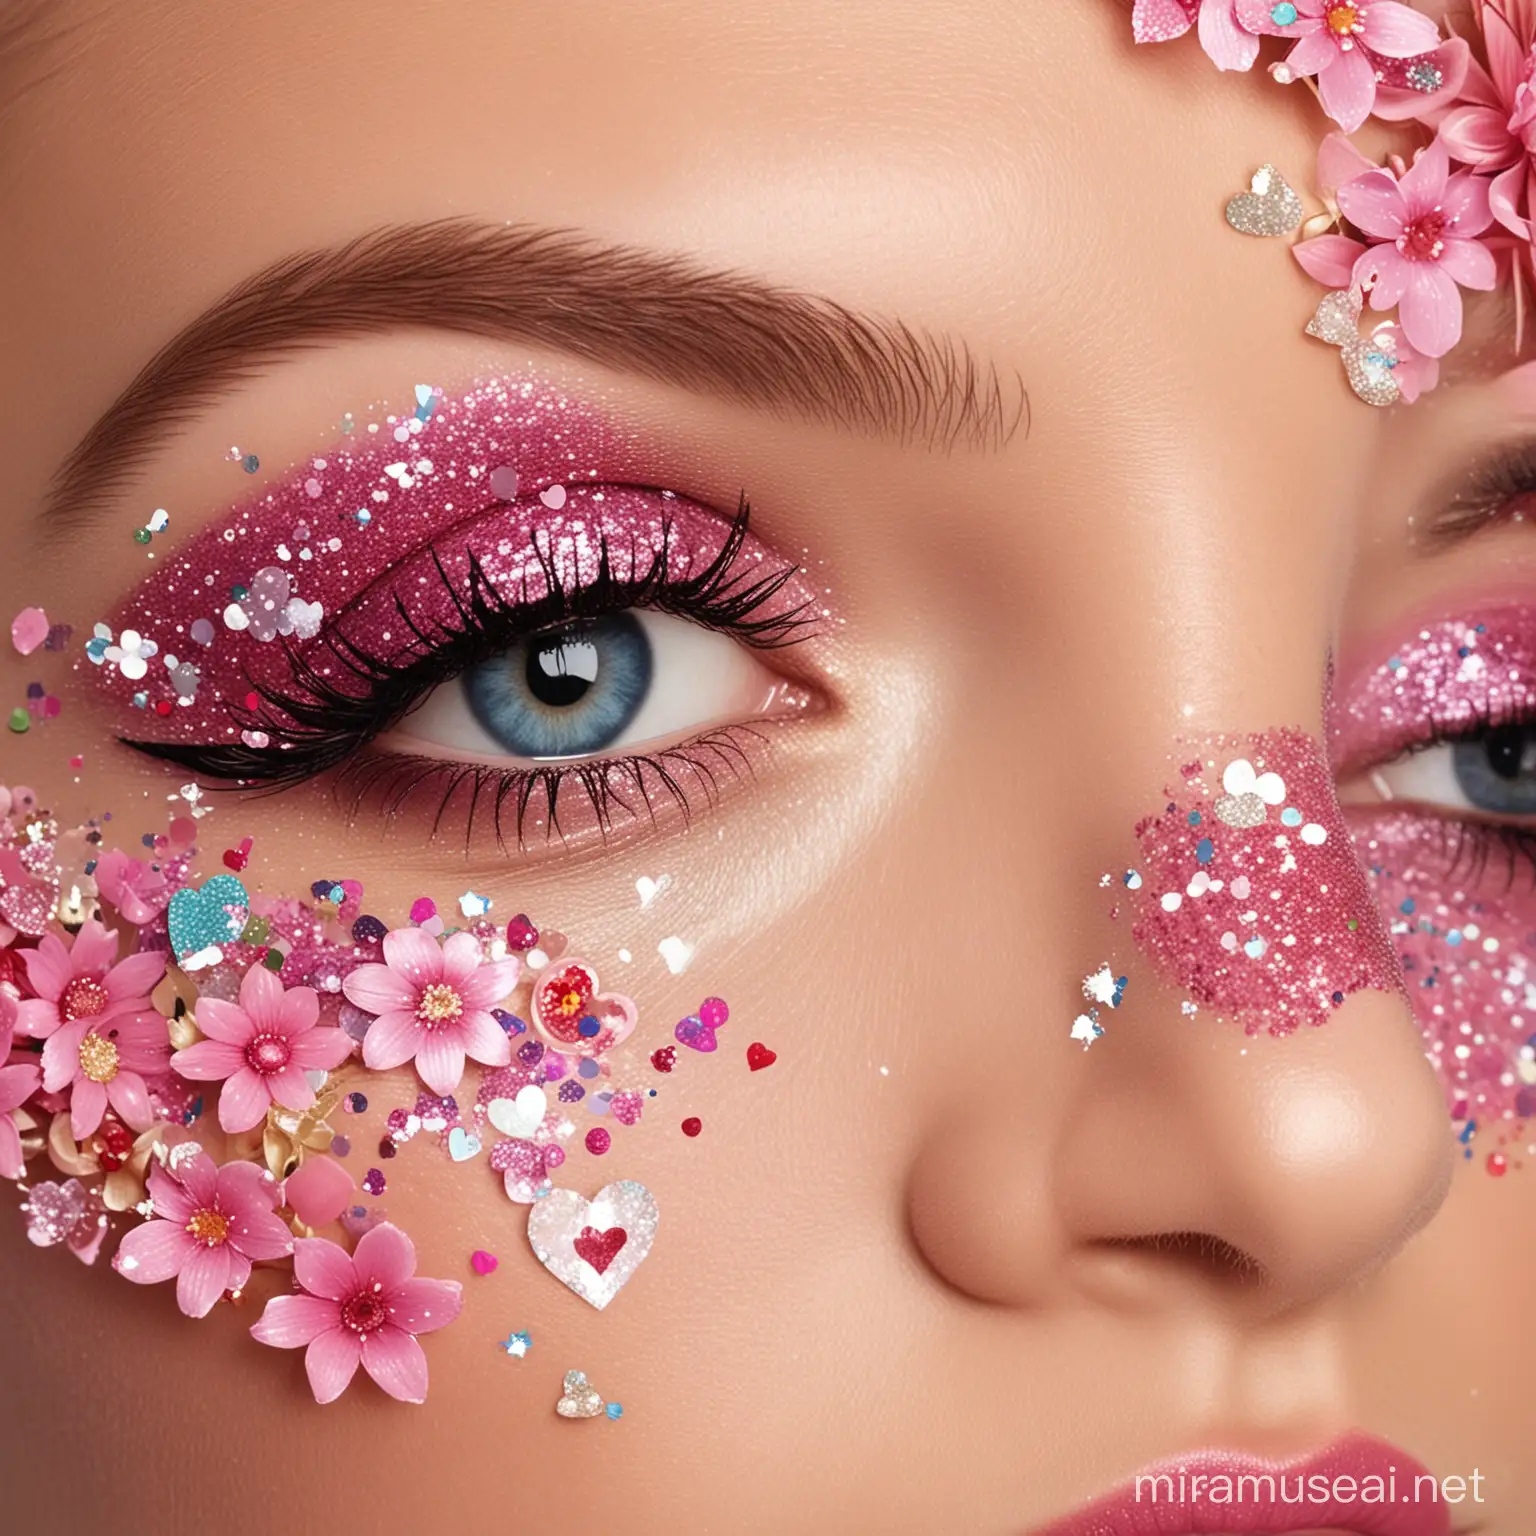 Romantic Composition Love Hearts Flowers Makeup and Glitter